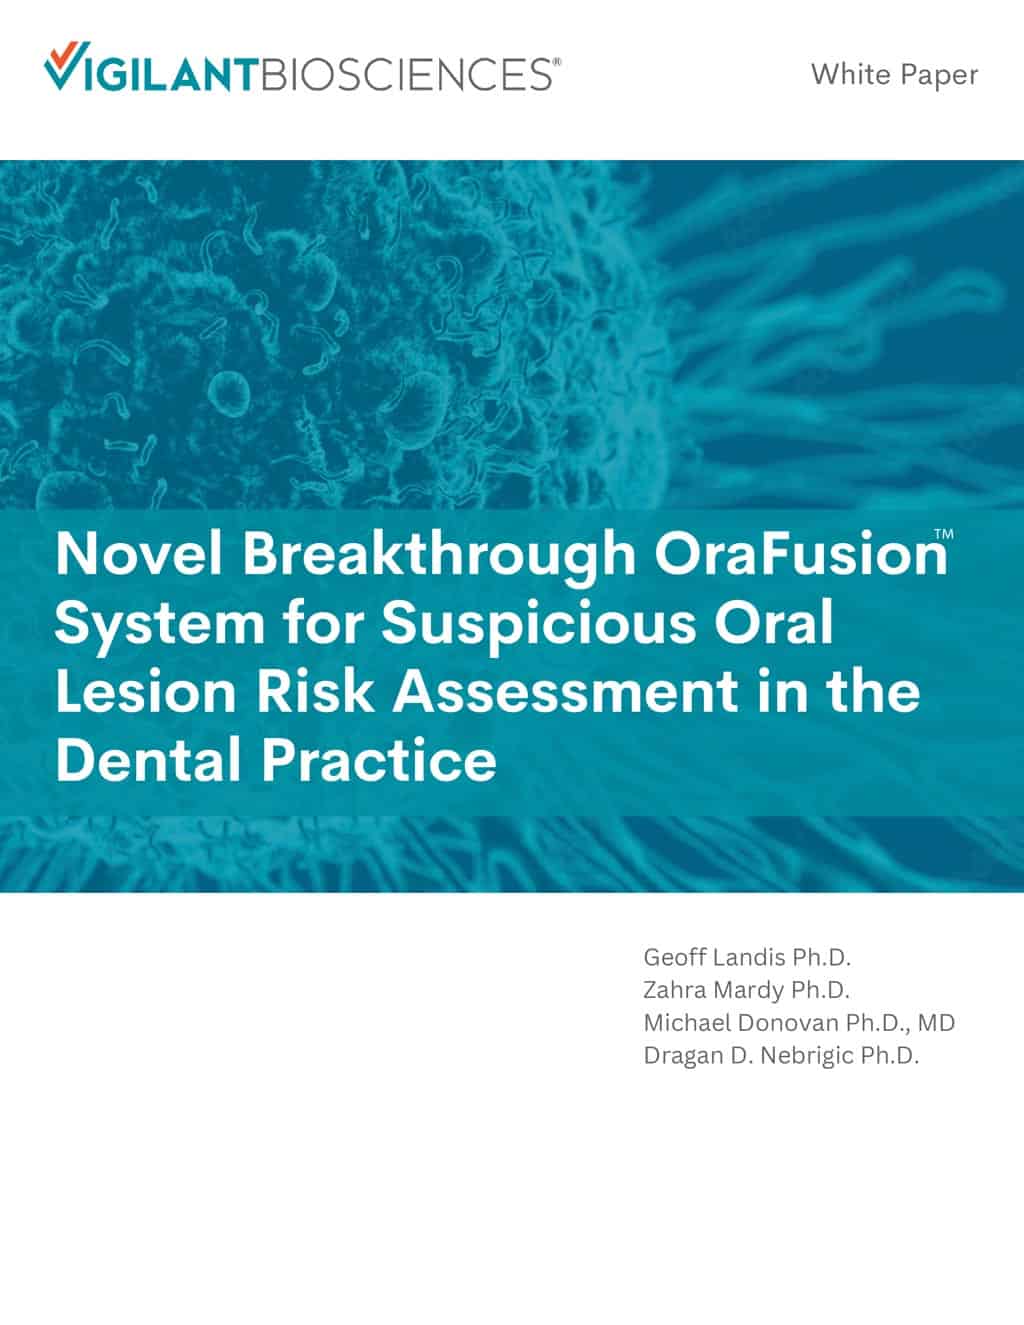 Novel Breakthrough OraFusion System for Suspicious Oral Lesion Risk Assessment in the Dental Practice White Paper Cover